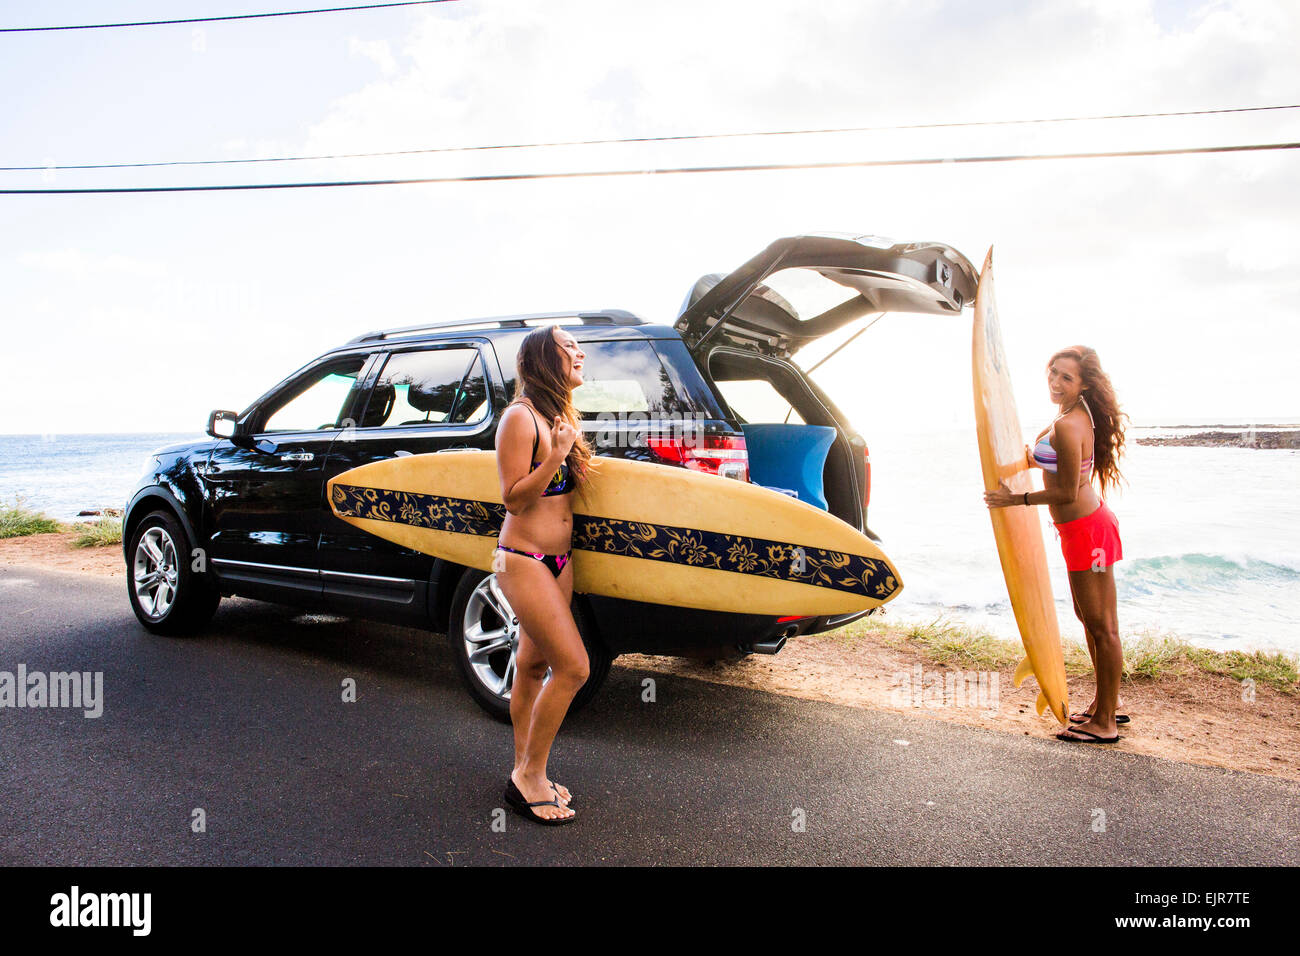 Surfers unloading surfboards from car near beach Stock Photo